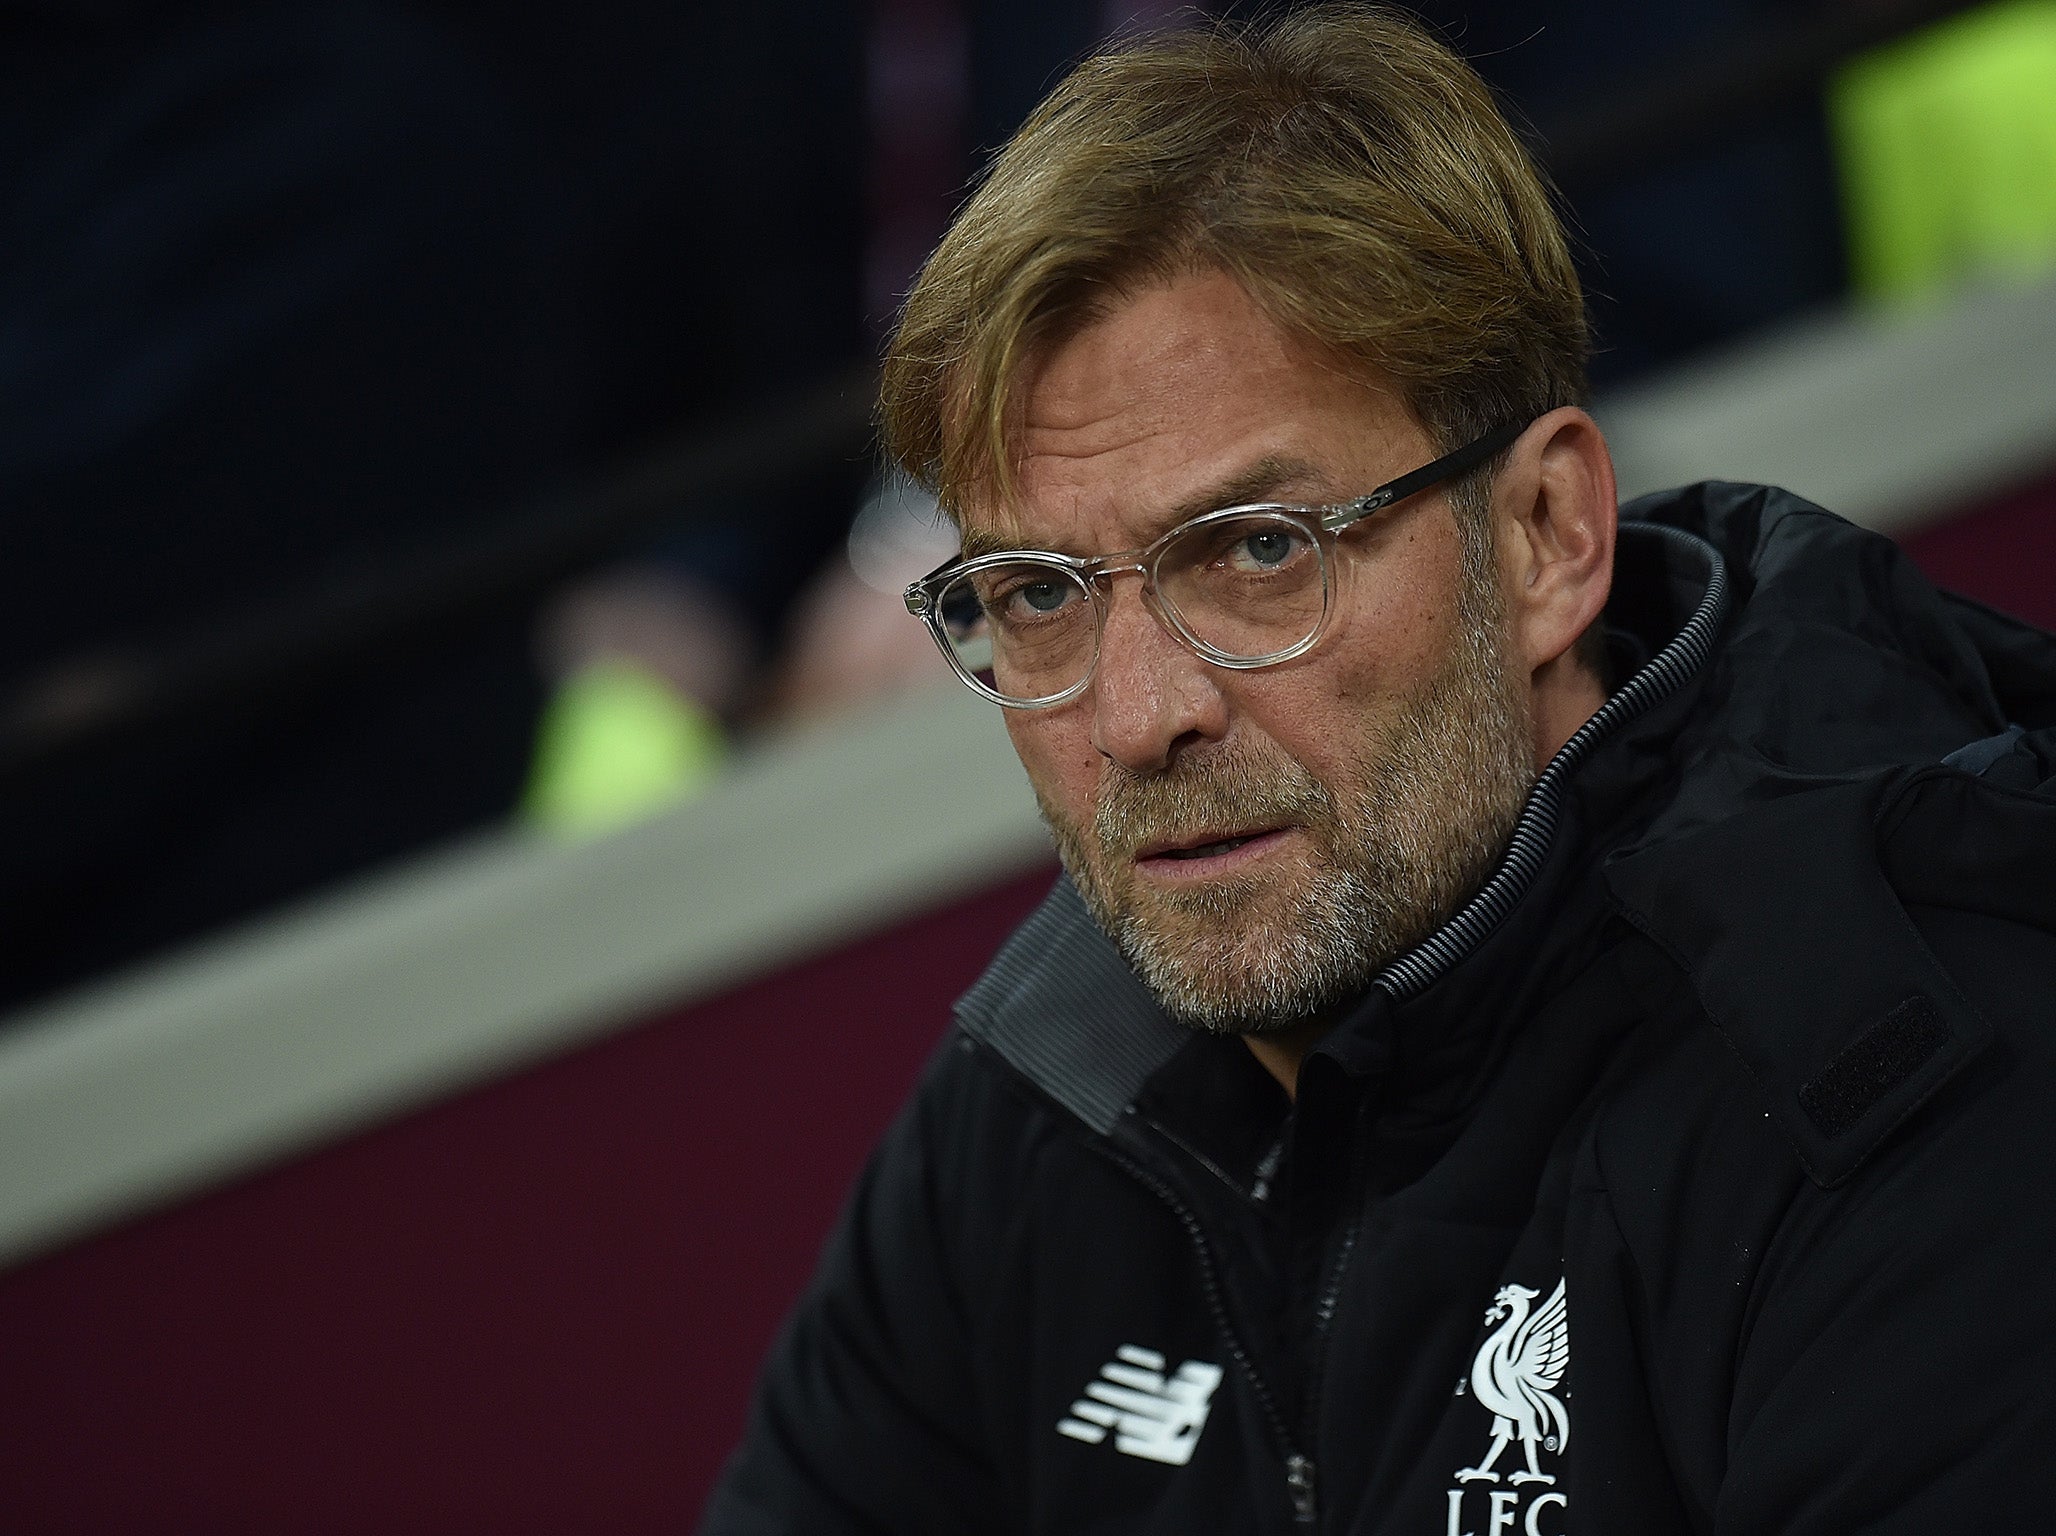 Klopp will continue to be monitored over the next few days